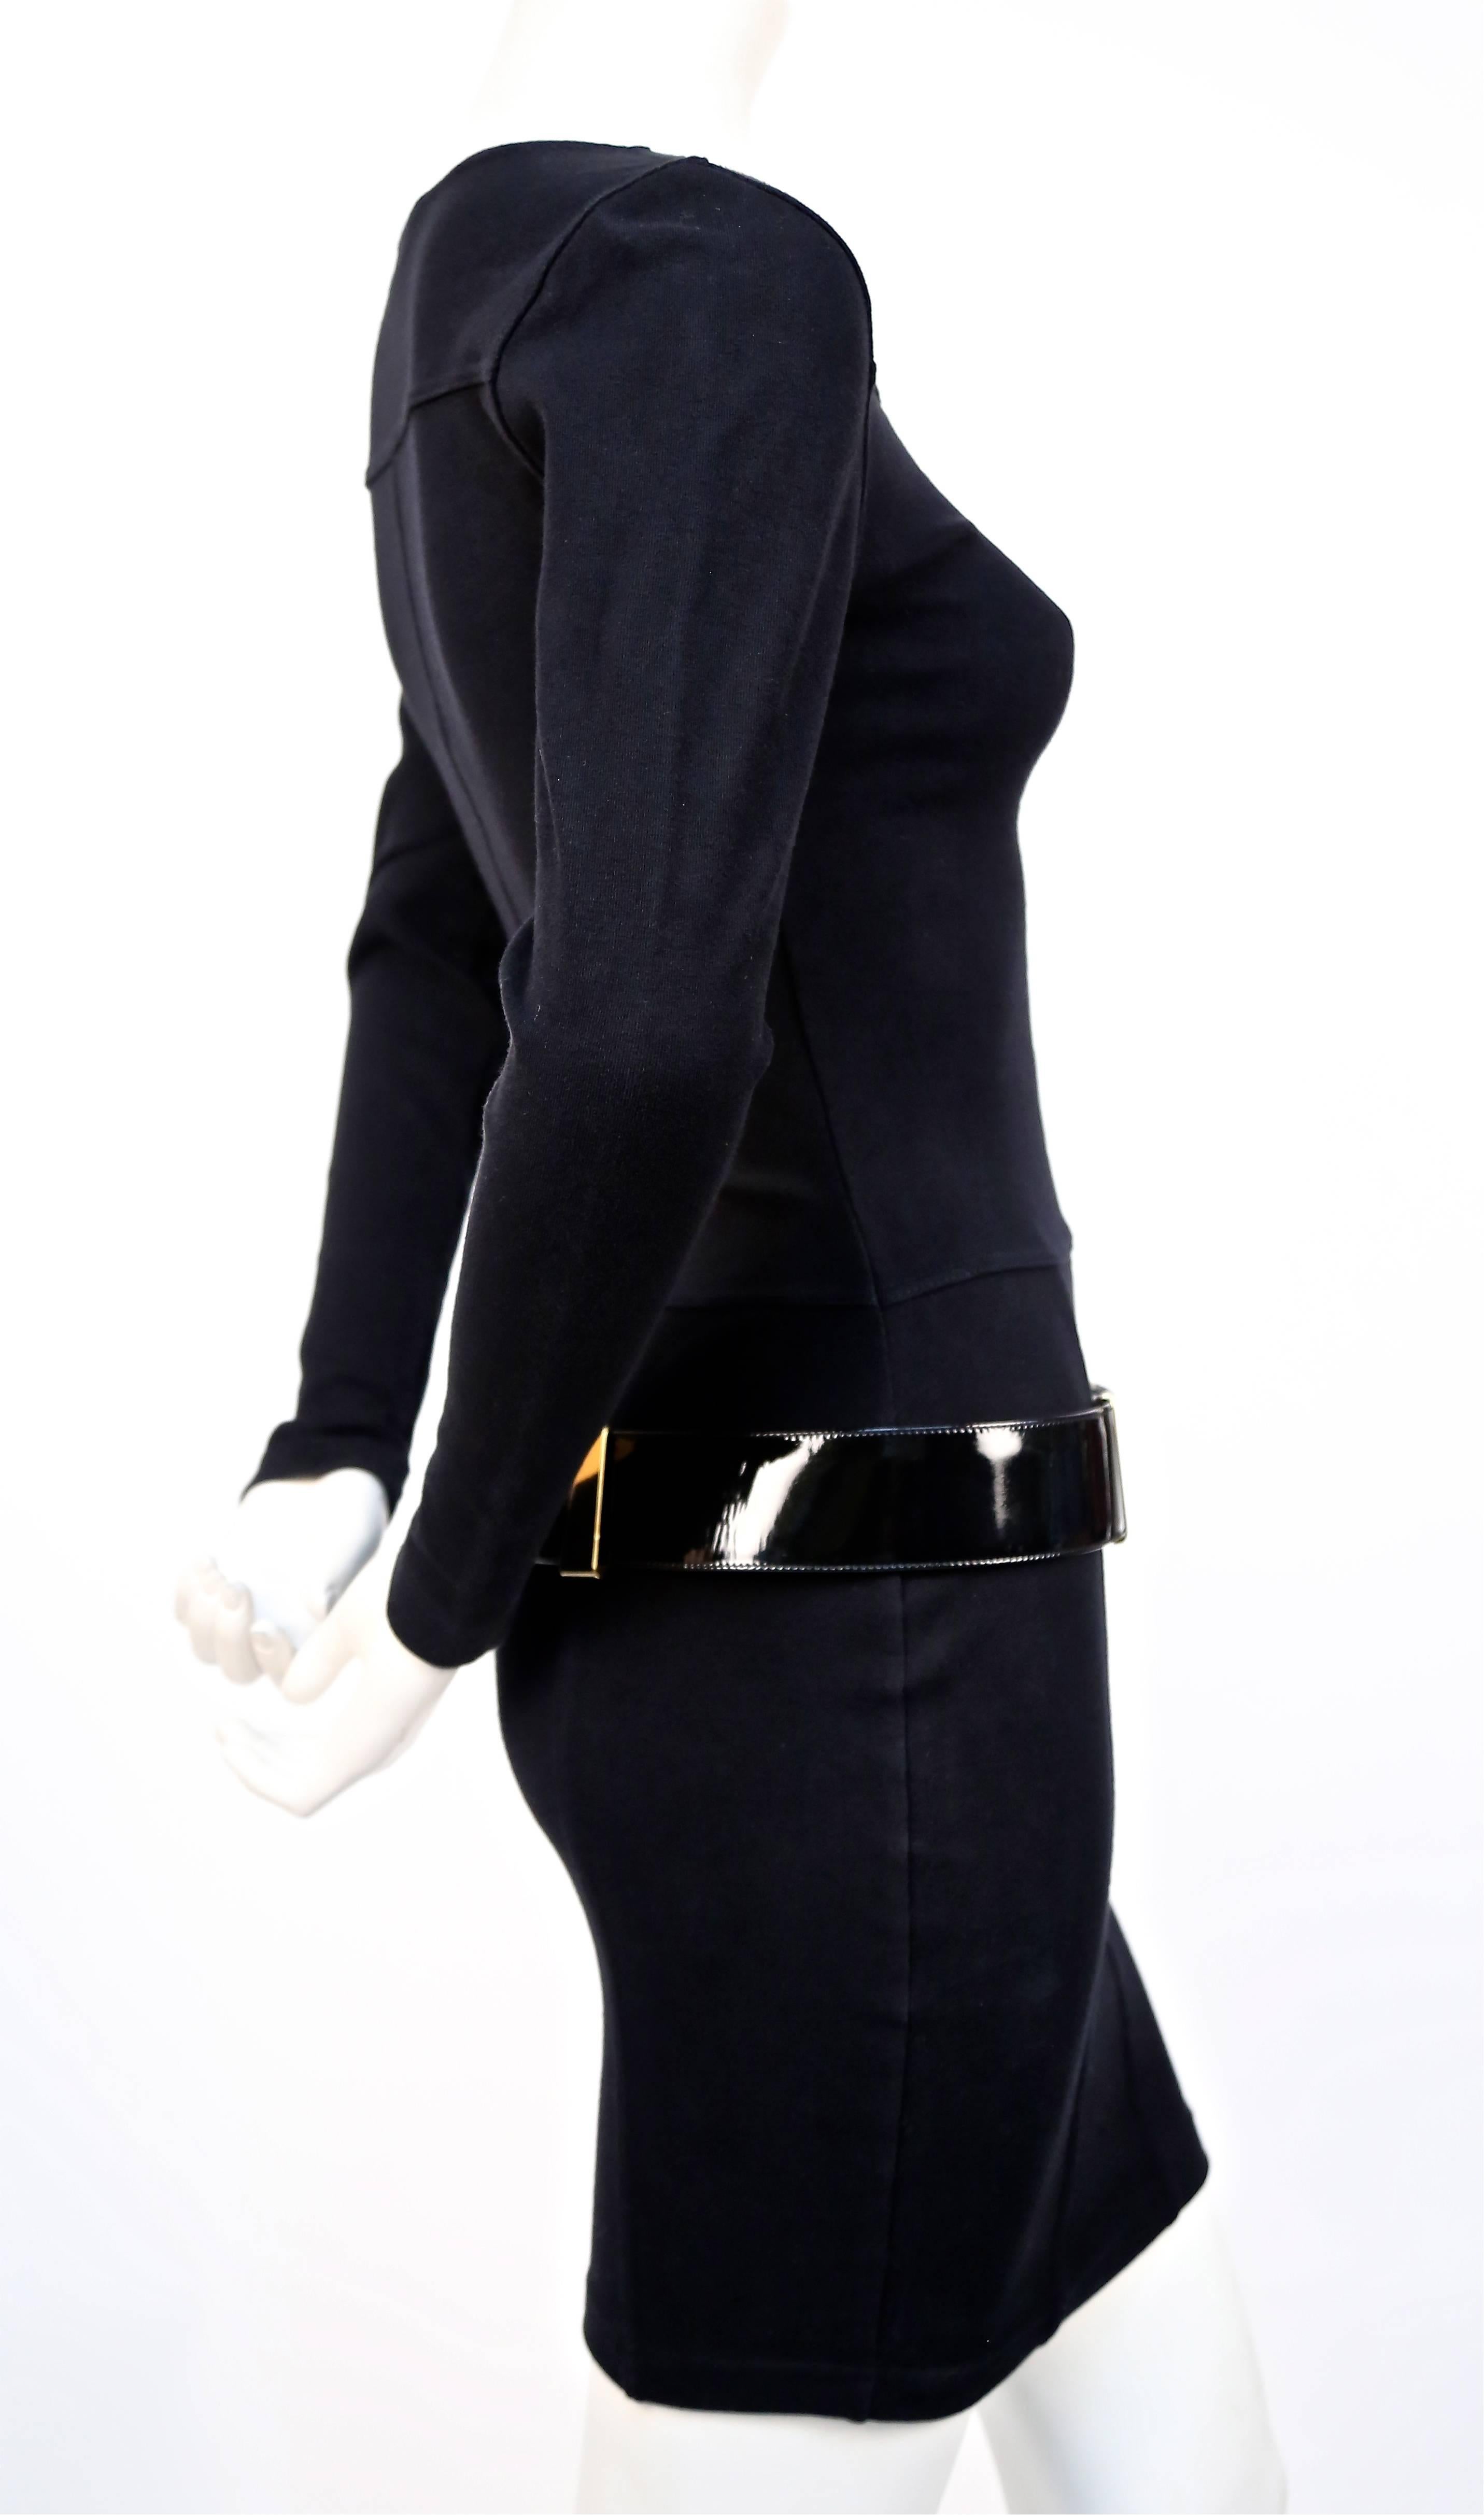 Black knit dress with gold hardware and black patent leather belt from Claude Montana dating to the early 1990's. Dress is labeled a French 40 (Italian 42) and best fits a size S. Approximate measurements un-stretched laying flat: shoulders  15